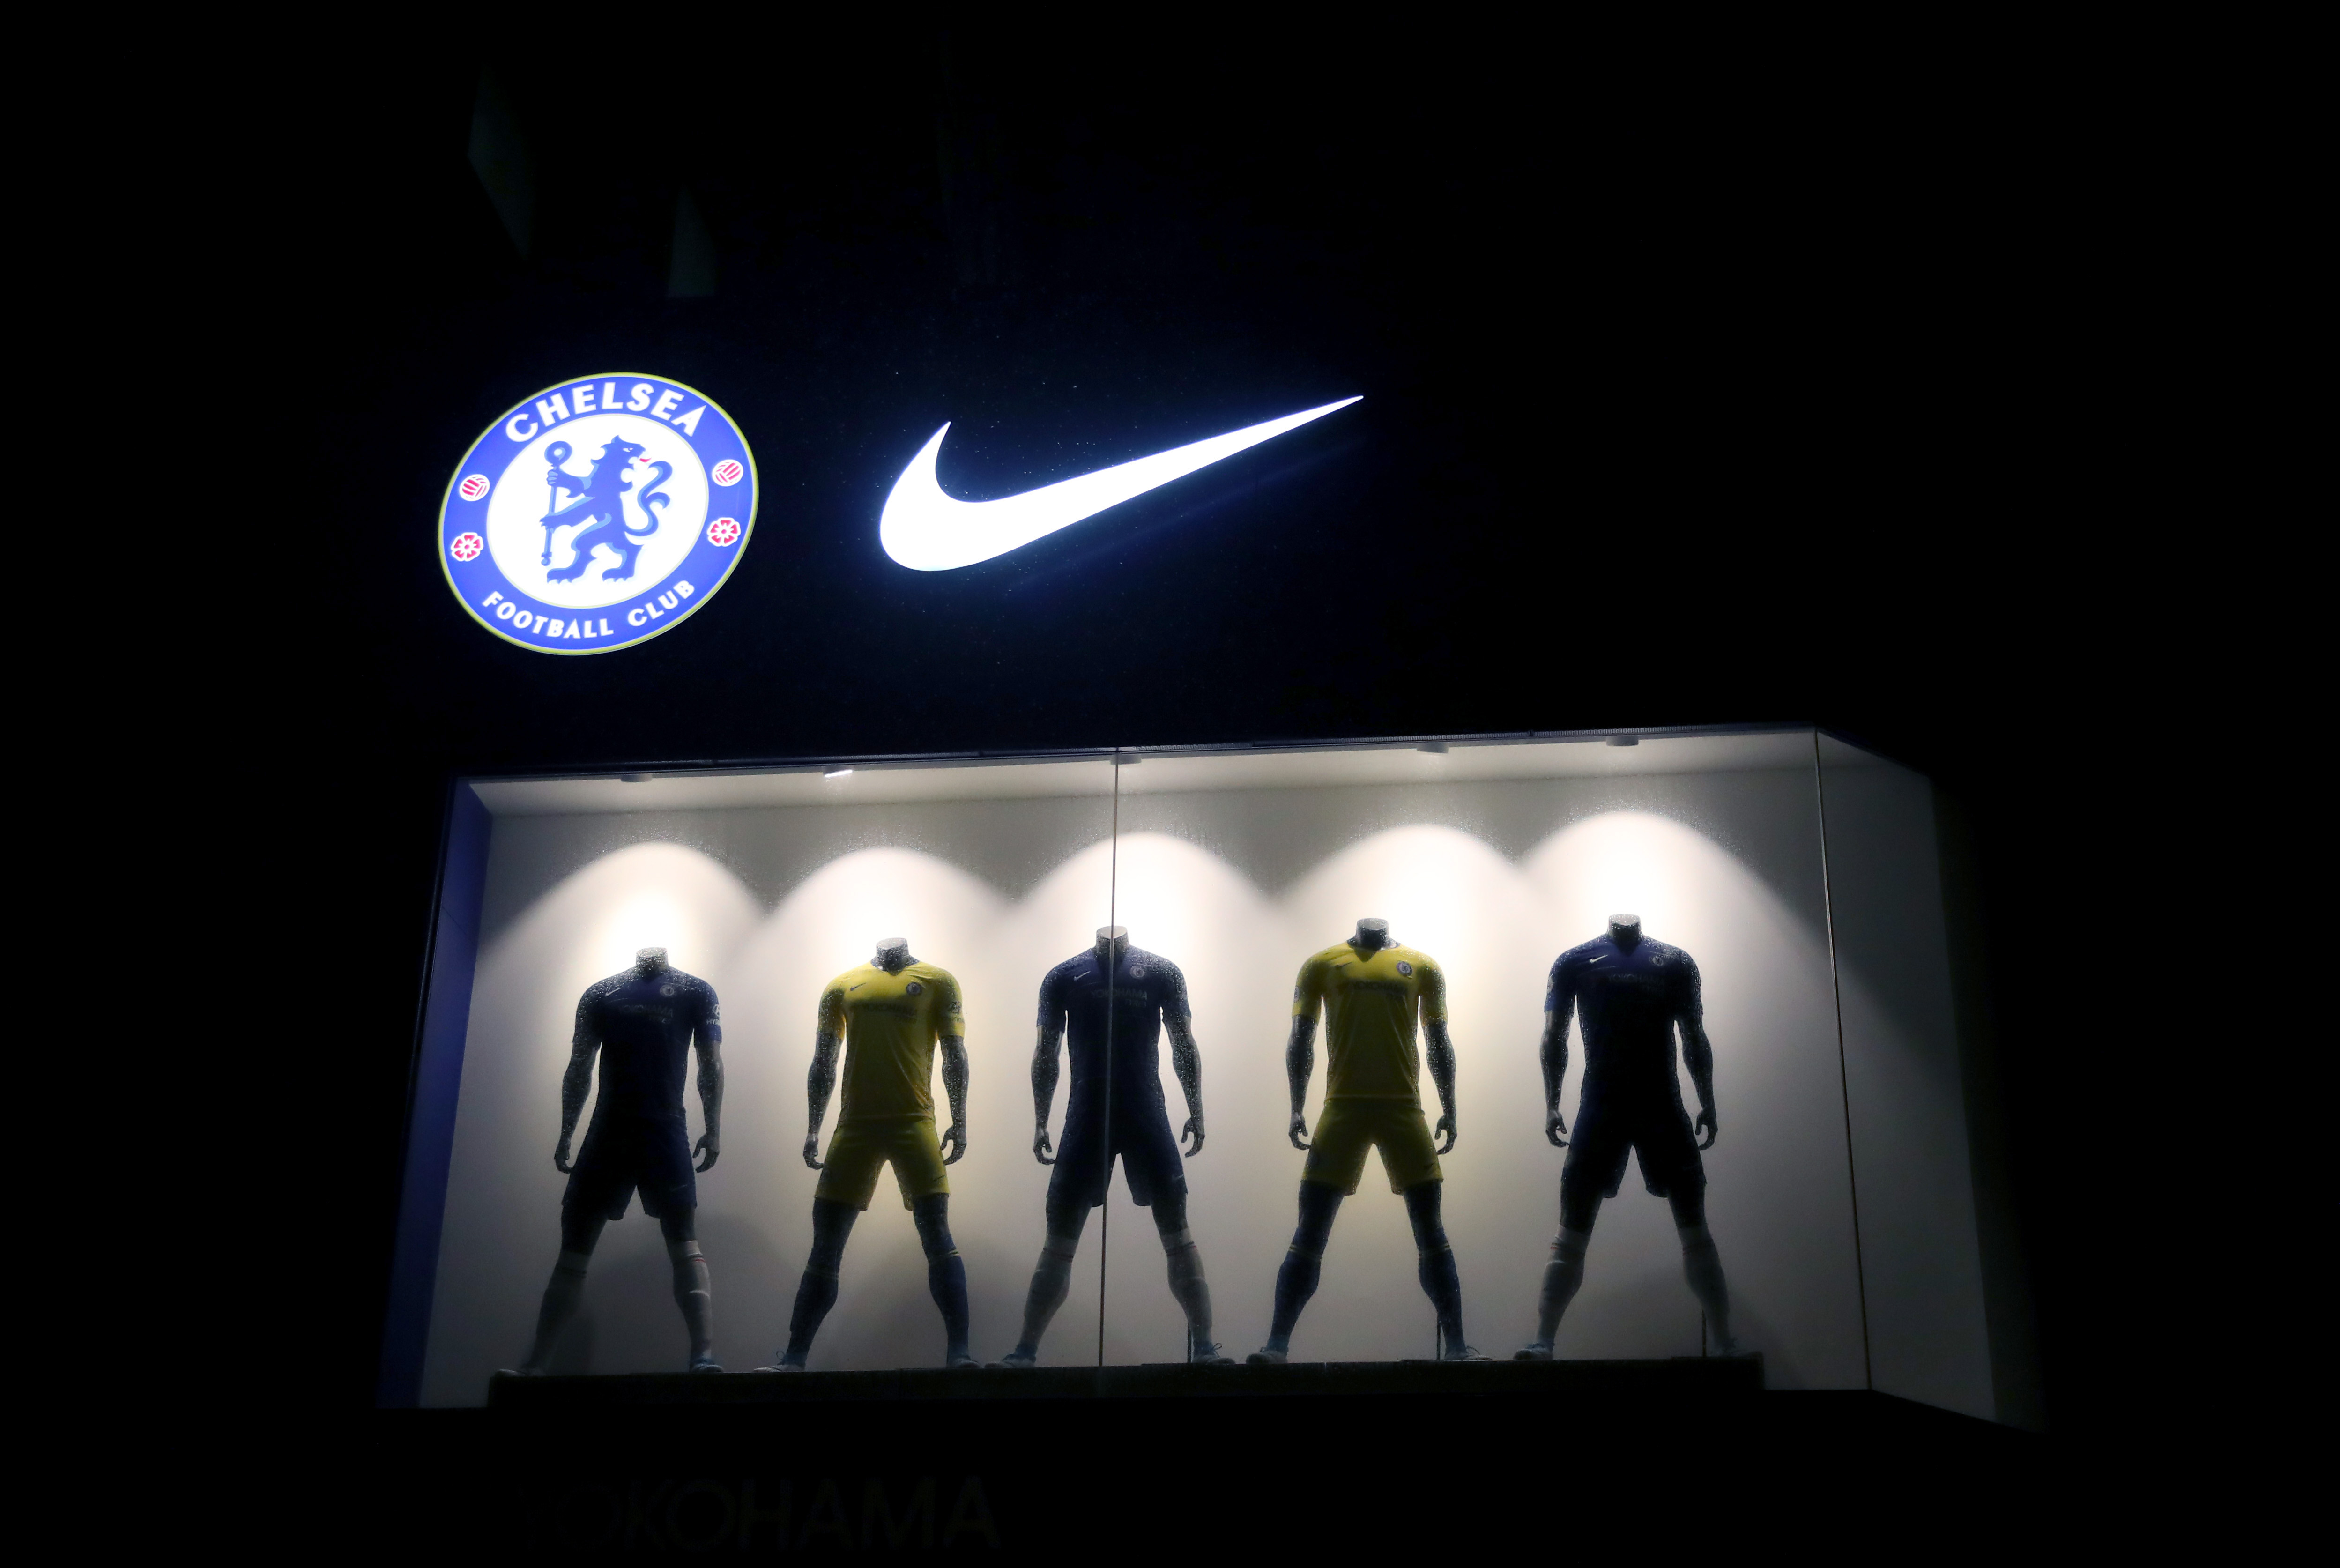 LONDON, ENGLAND - MARCH 07: View of the Nike kit on display ahead of the UEFA Europa League Round of 16 First Leg match between Chelsea and Dynamo Kyiv at Stamford Bridge on March 07, 2019 in London, England. (Photo by Catherine Ivill/Getty Images)